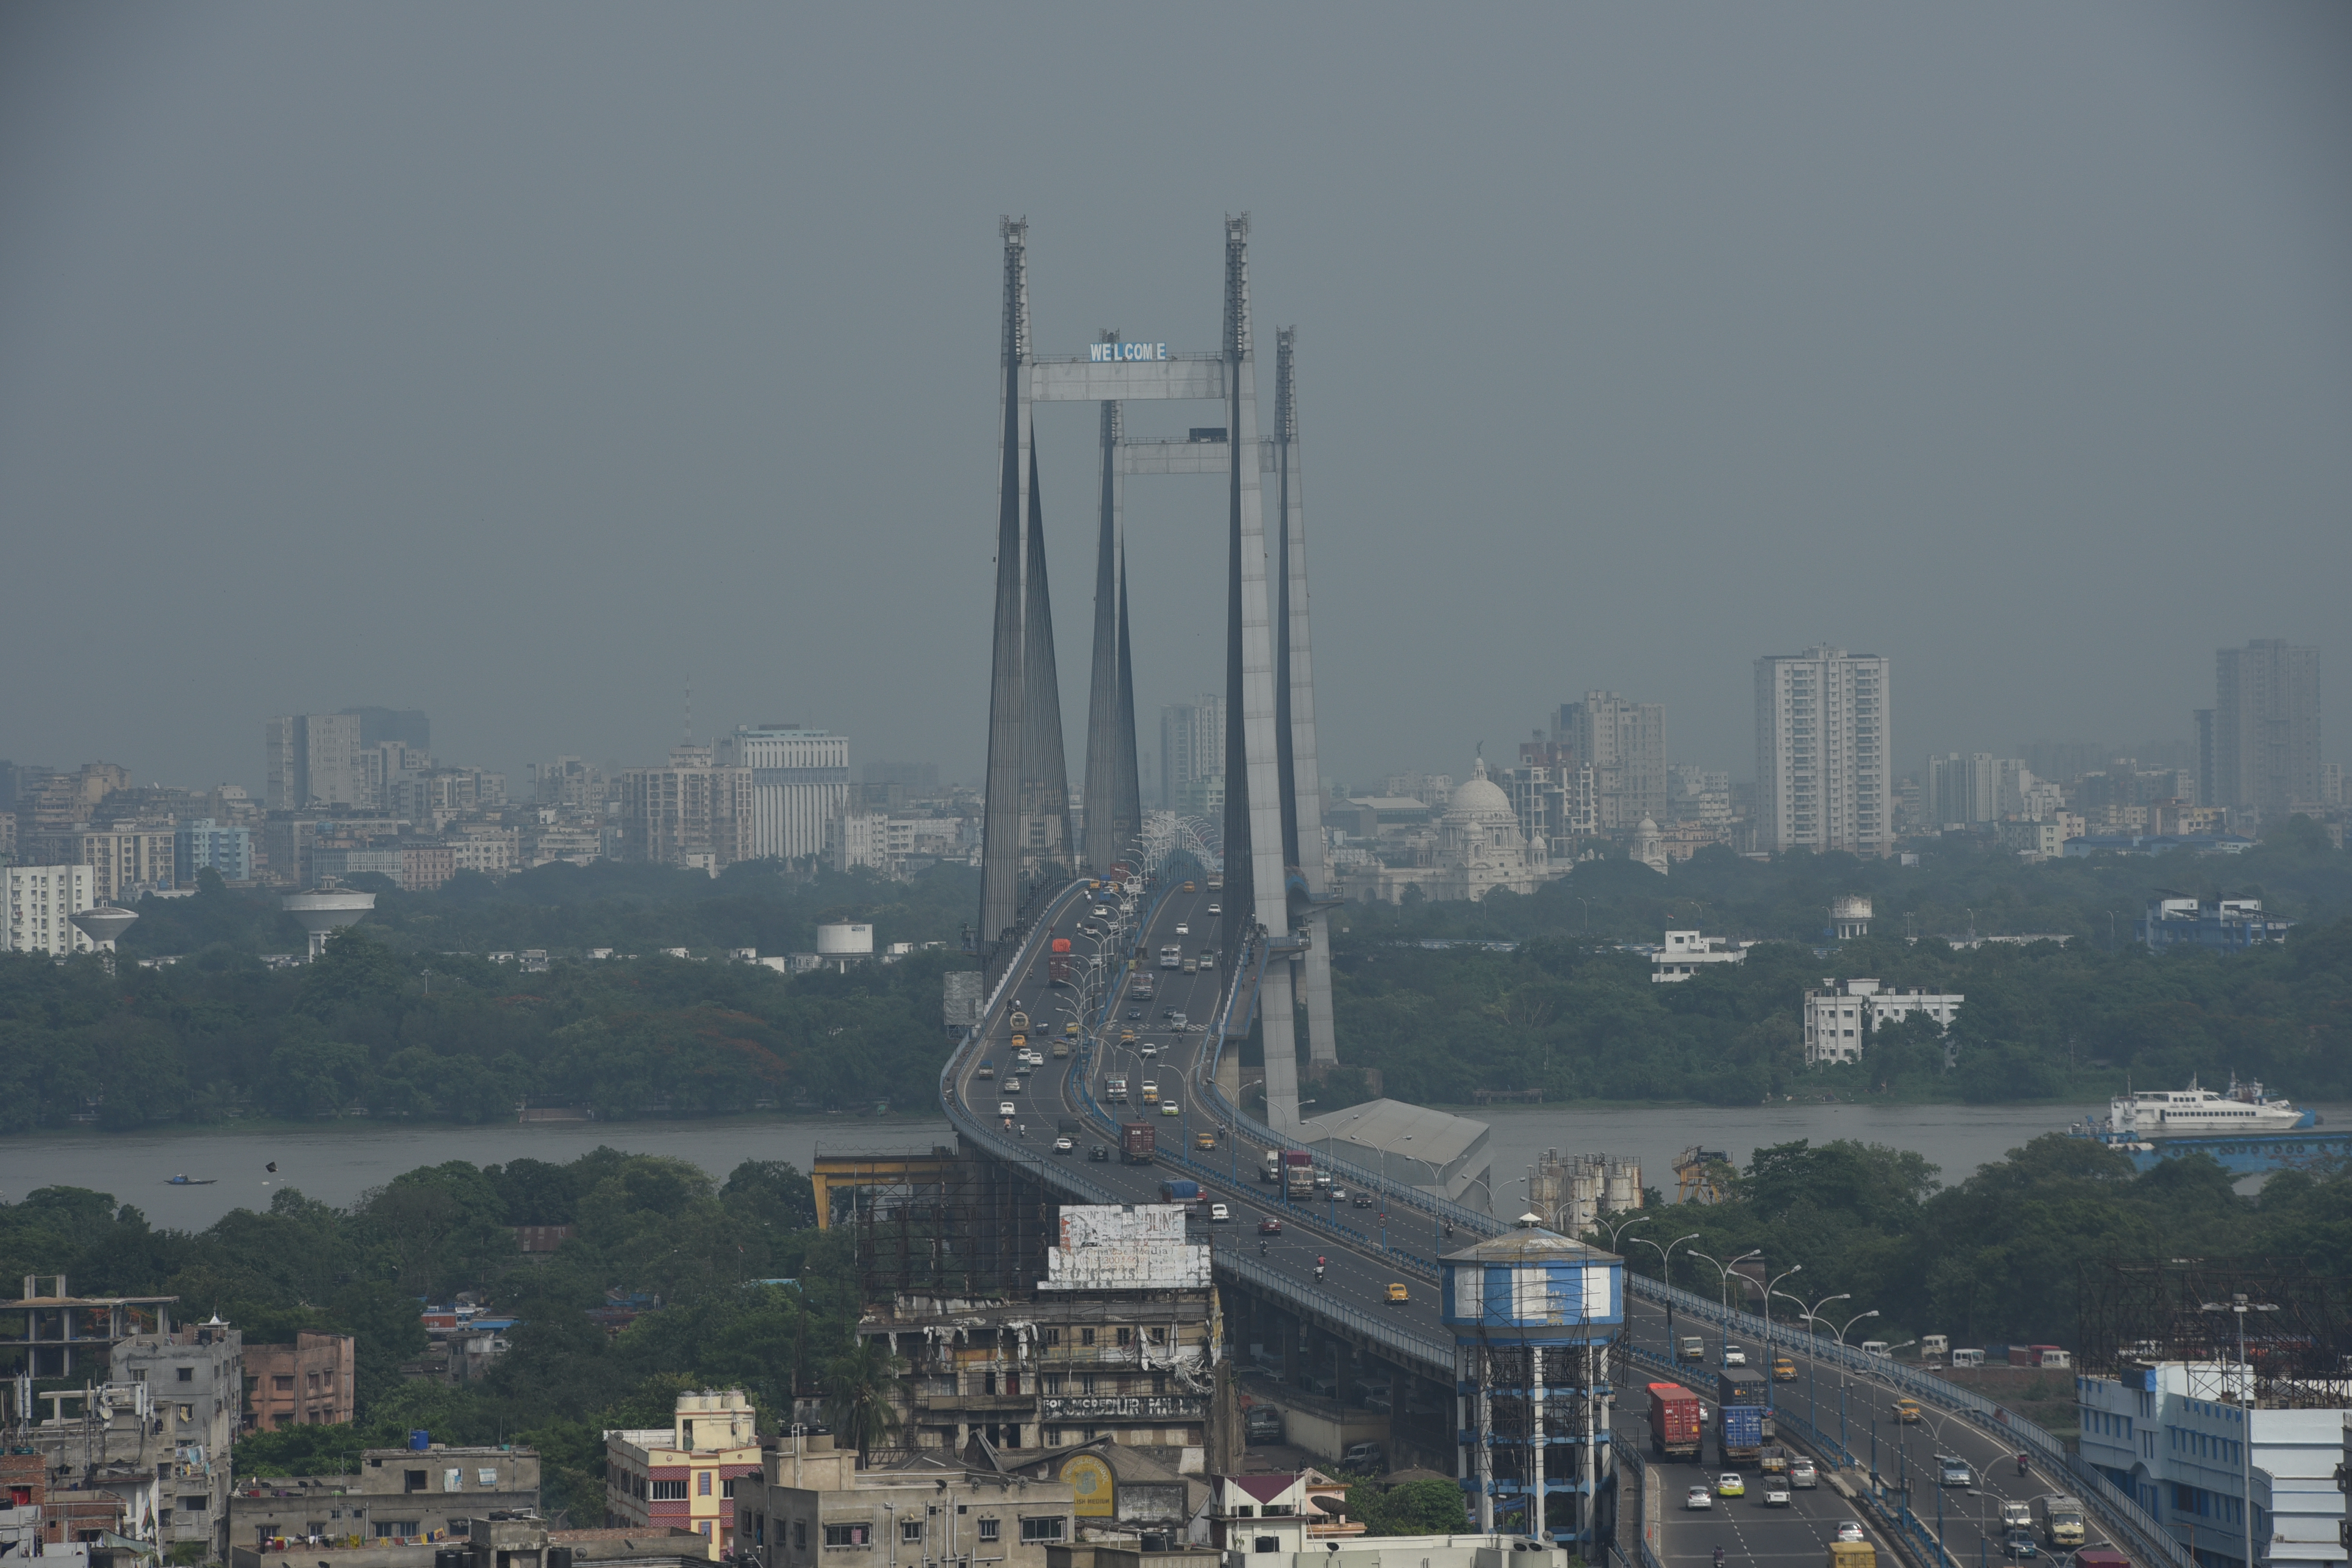 The Calcutta skyline with the Vidyasagar Setu in the foreground and the Victoria Memorial just beyond it, to the right